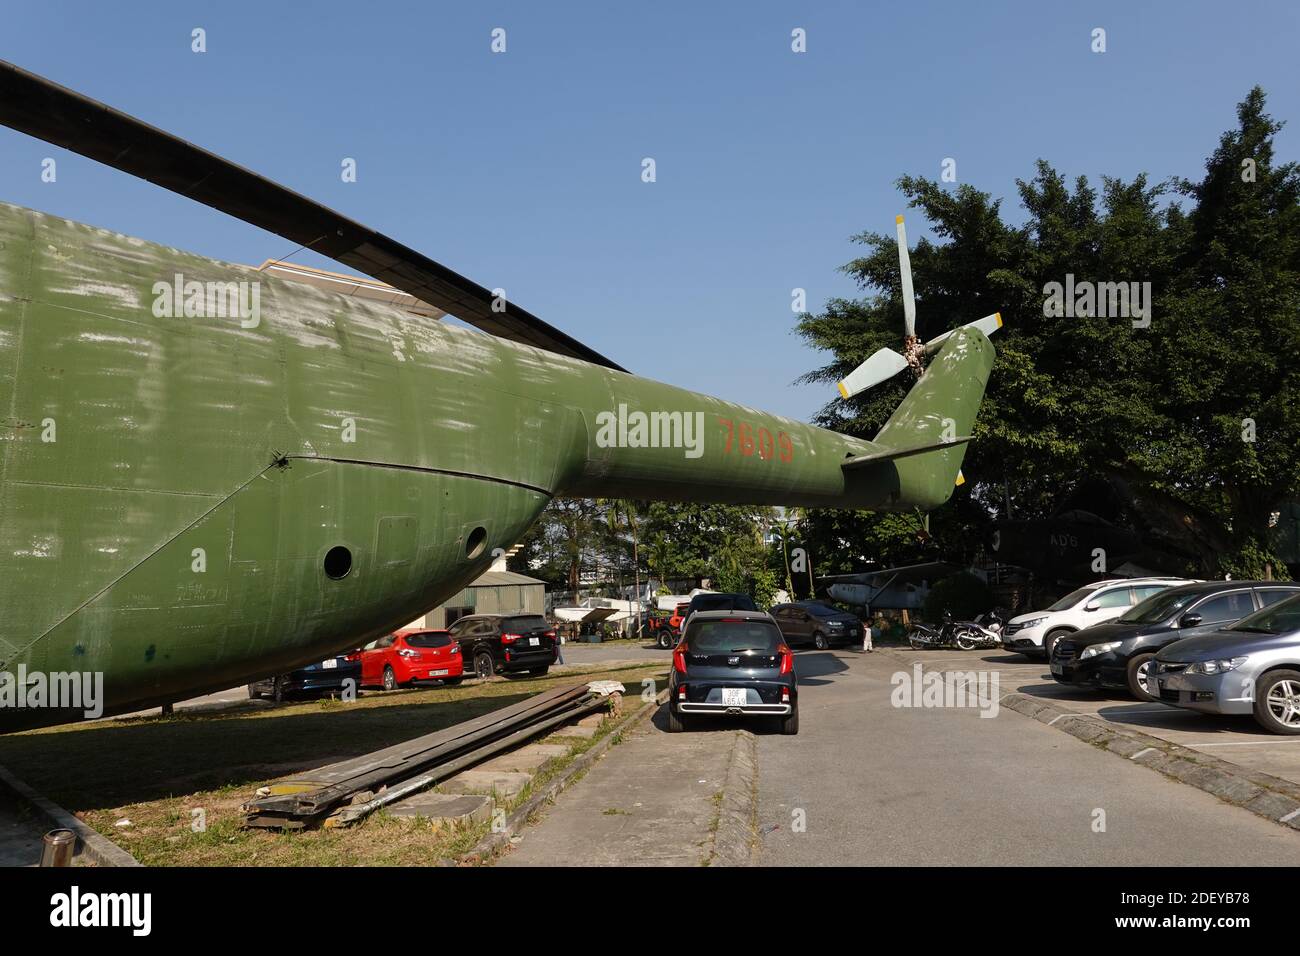 Russian military attack helicopter Mil Mi-26 in Vietnam People's Air Force Museum, Hanoi Stock Photo